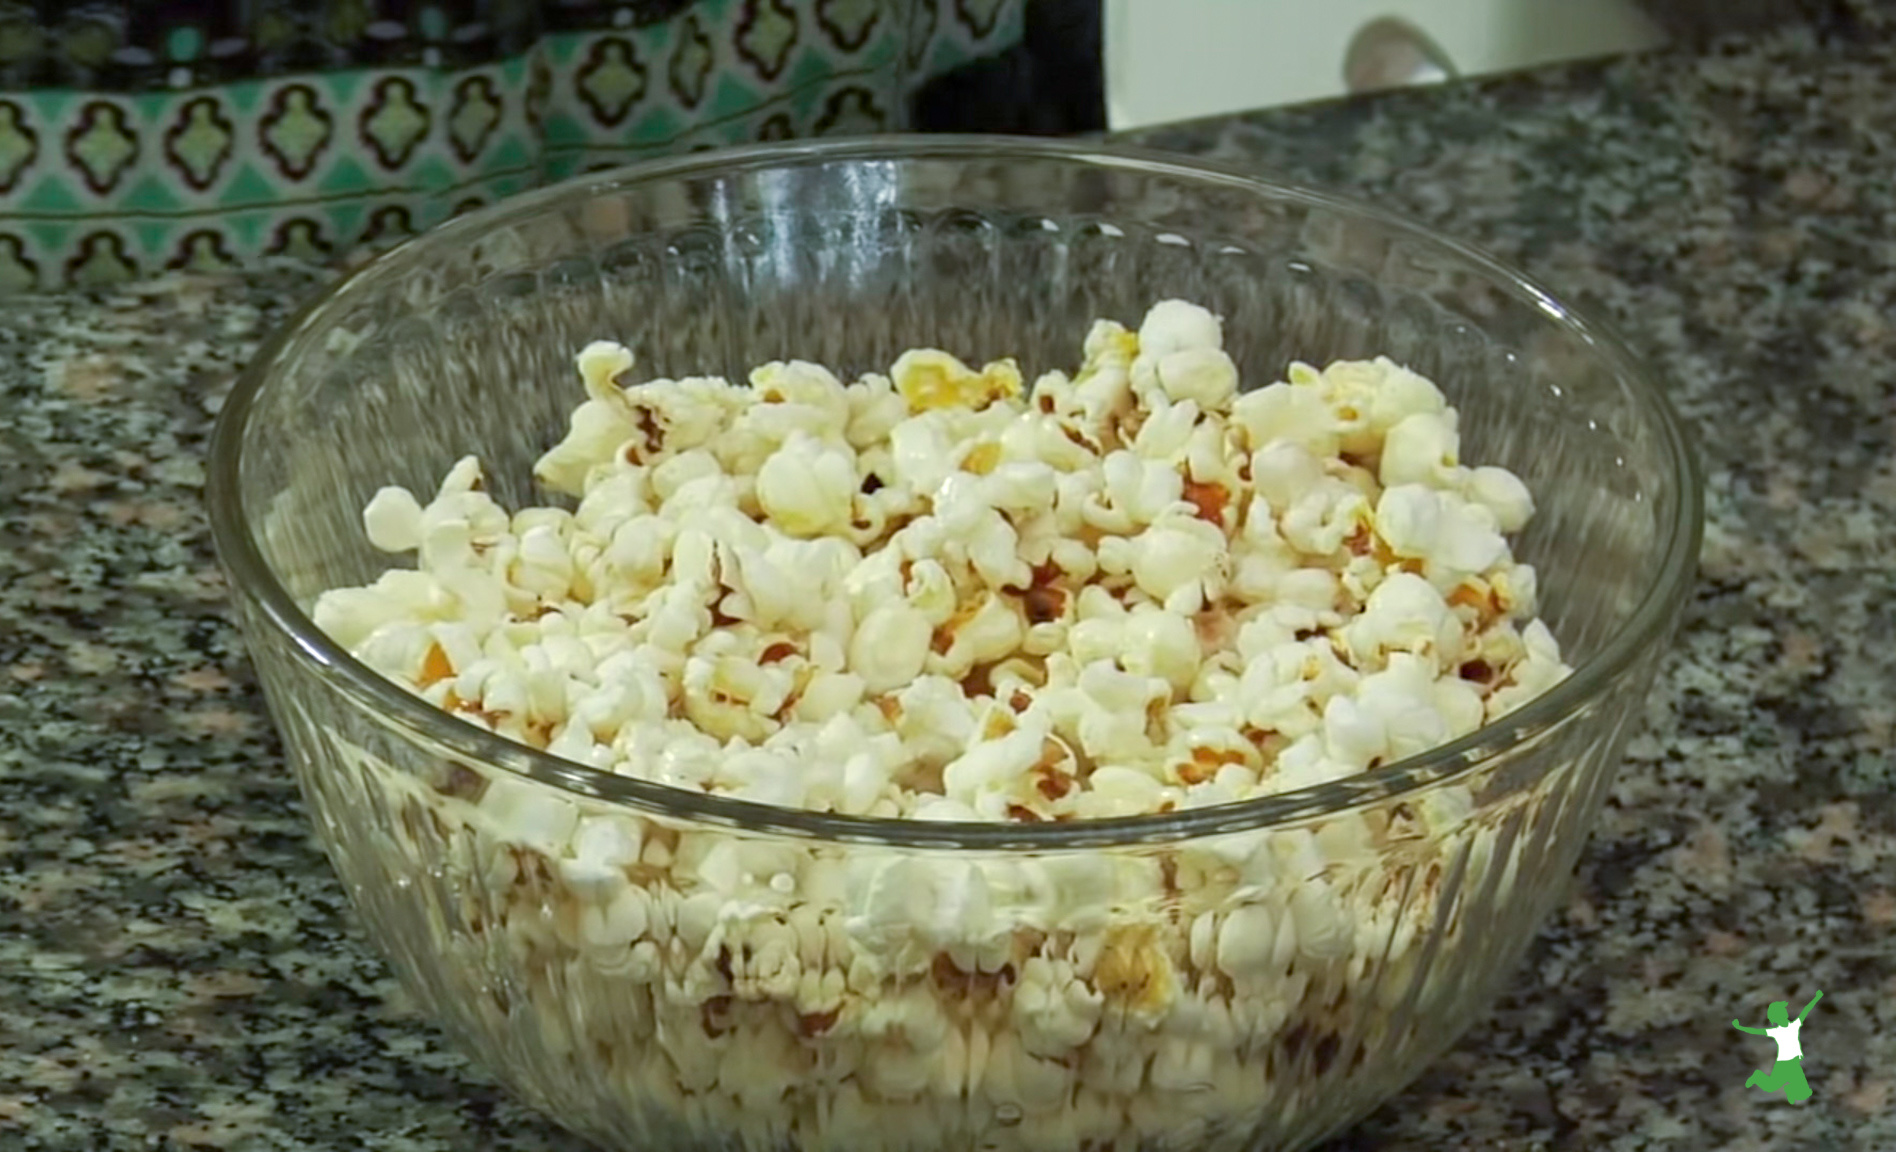 Stovetop Popcorn Recipe - How to Make Popcorn the Old Fashioned Way